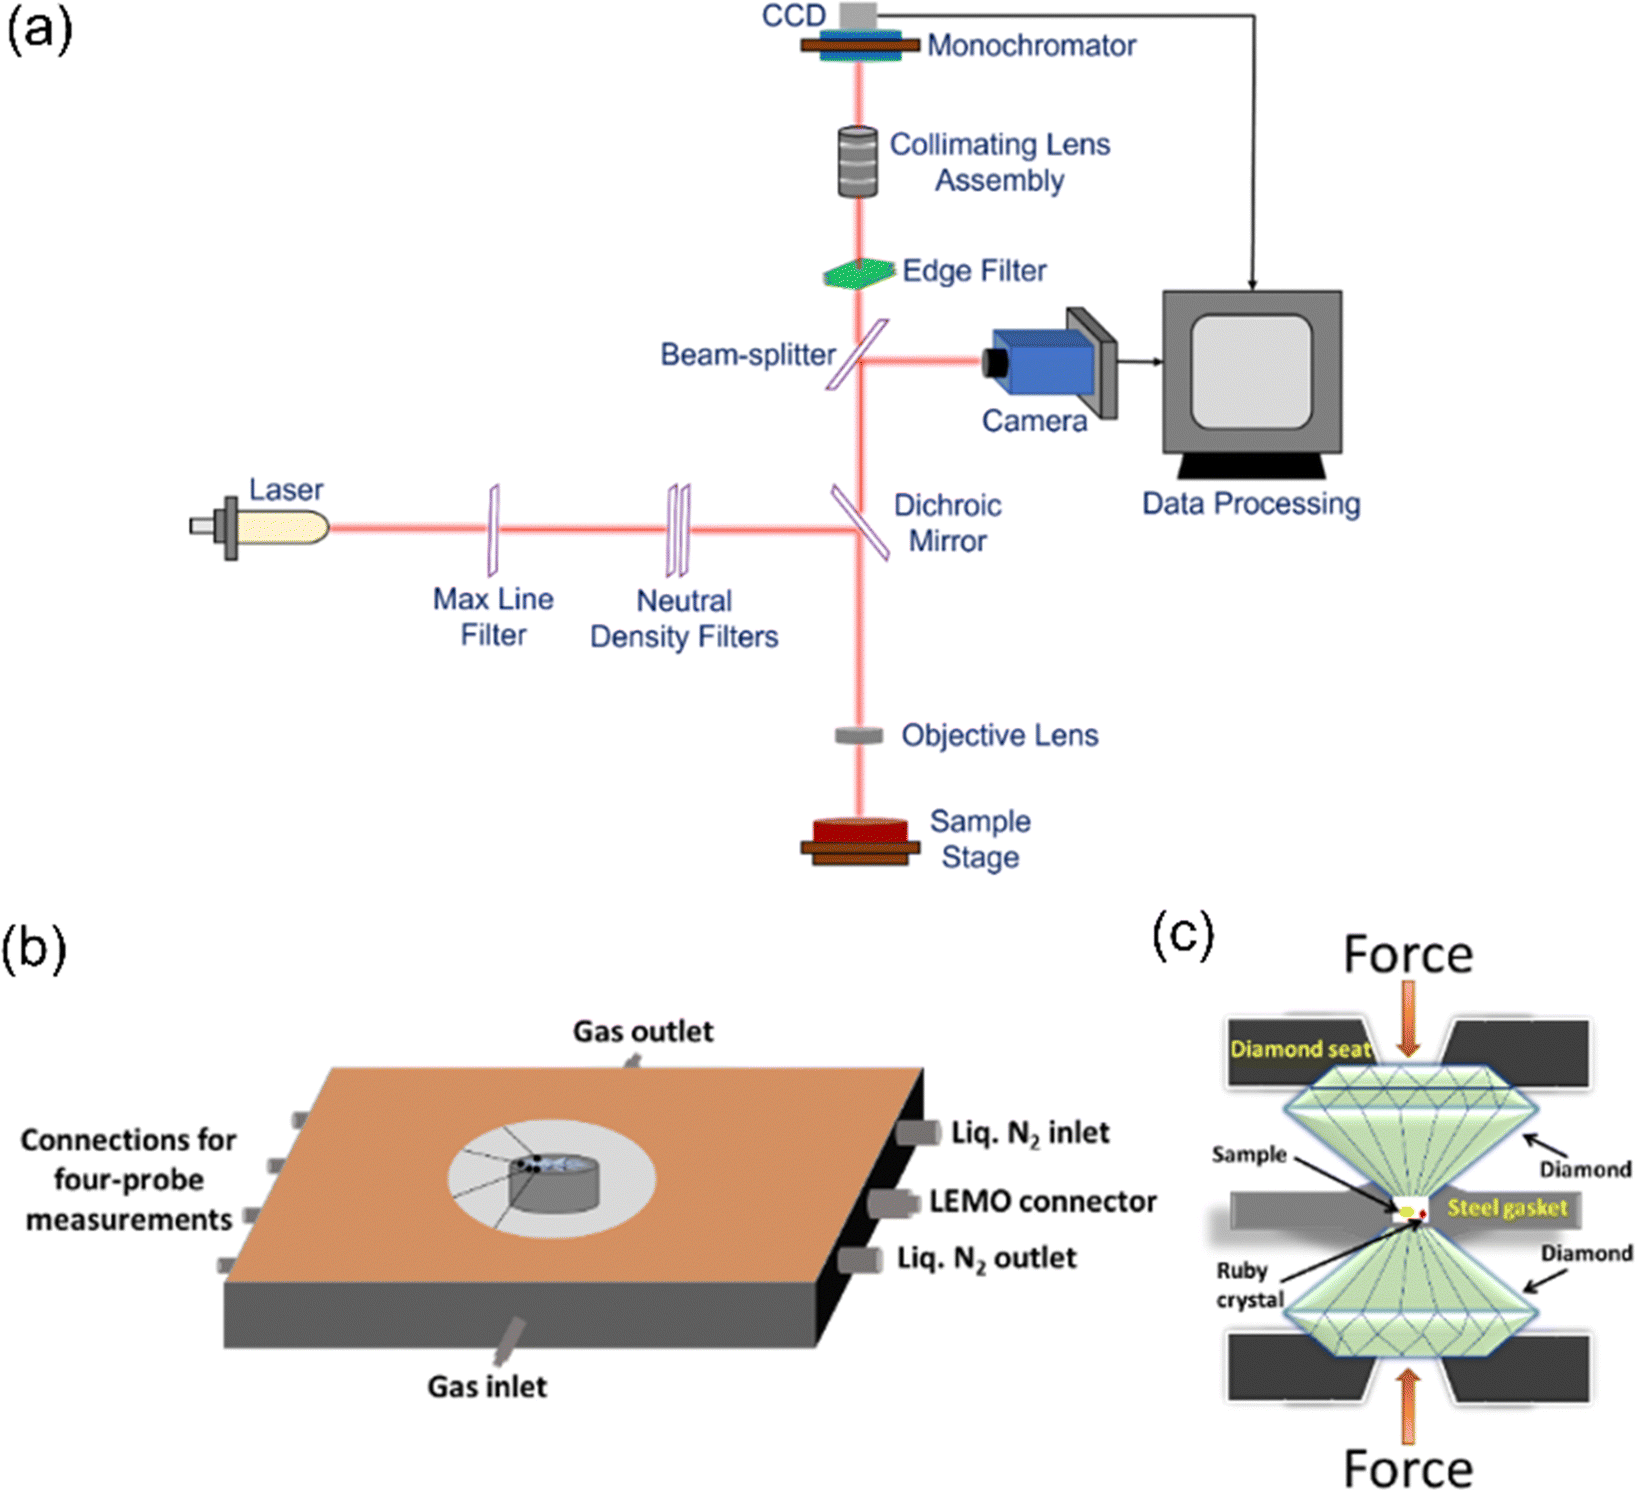 a) A MCF laser cavity based on air spacing and bulk mirrors for